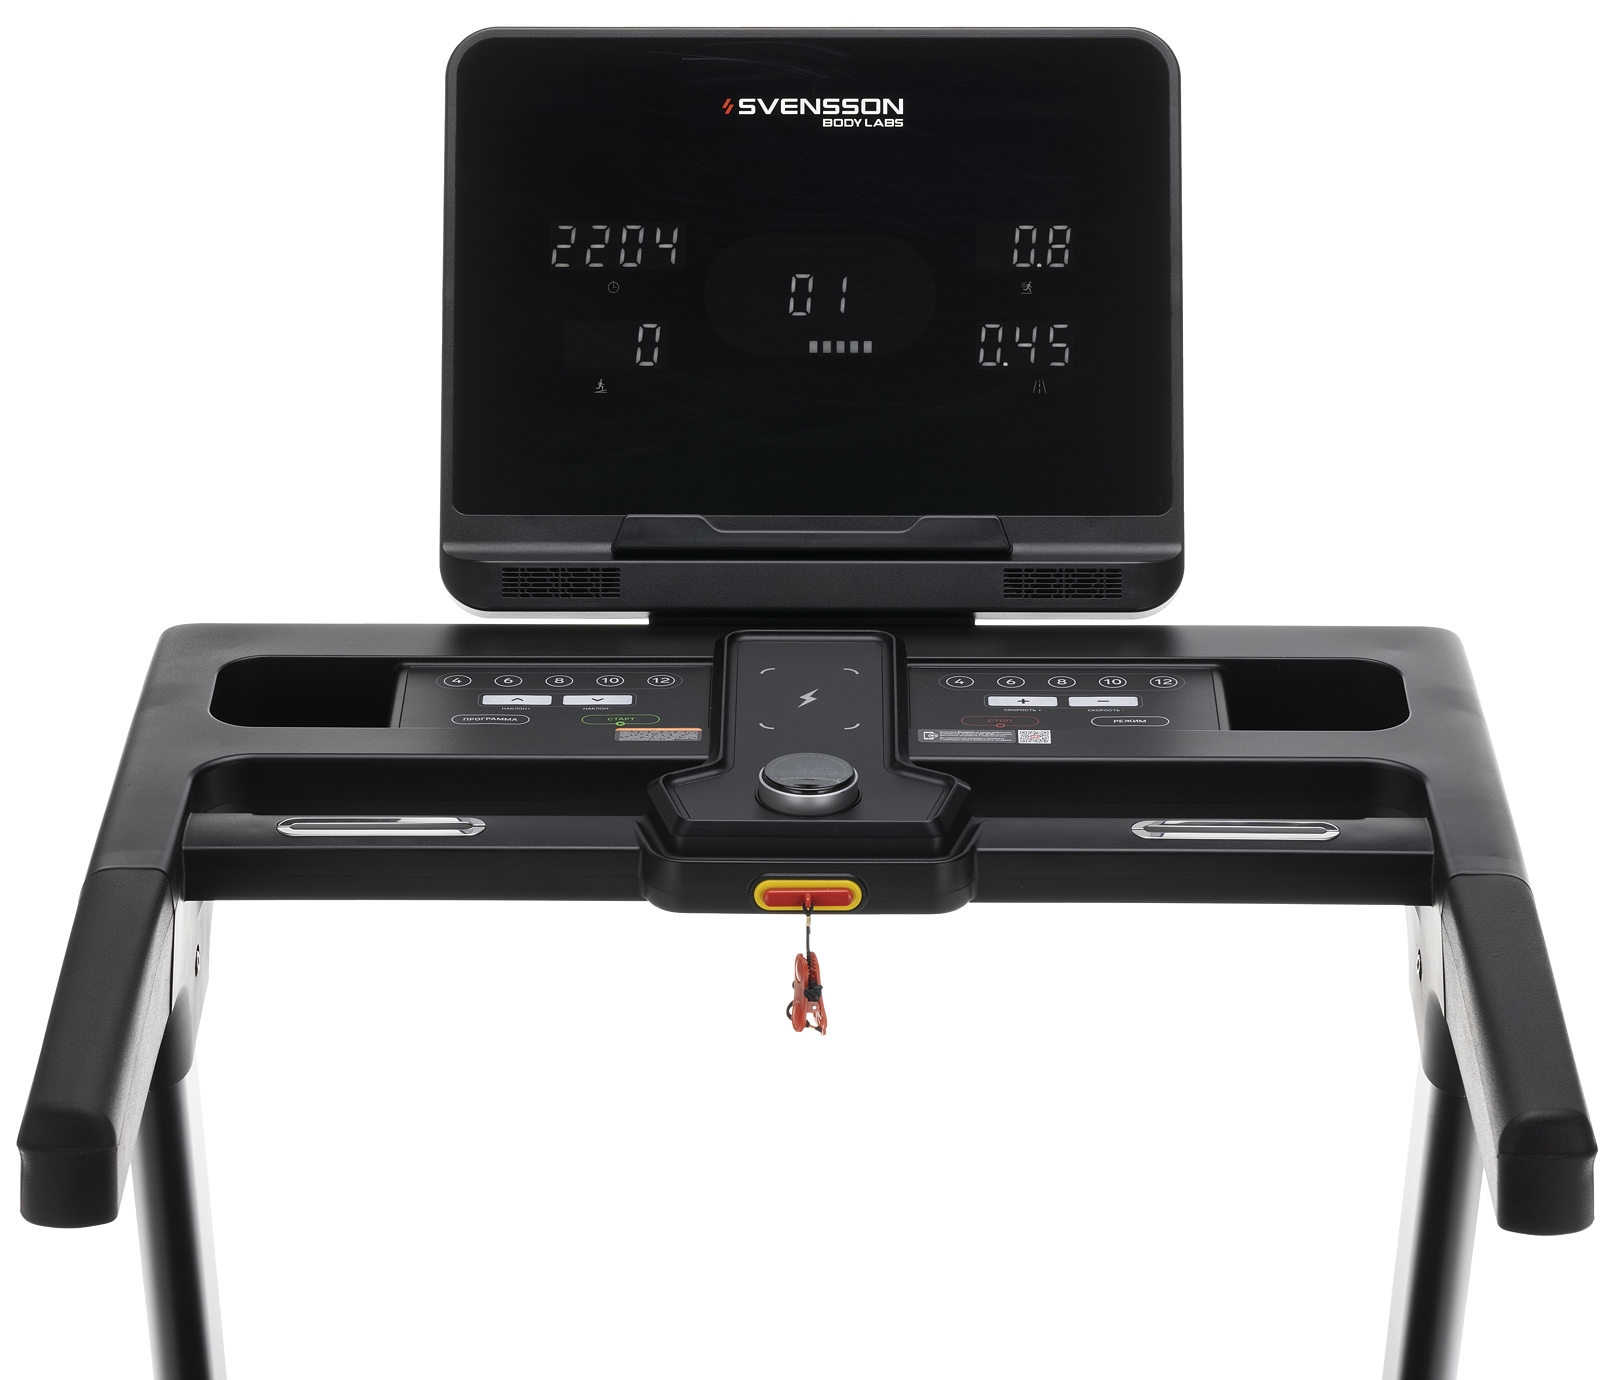 SVENSSON BODY LABS PHYSIOLINE SPRINTMASTER A preview 2